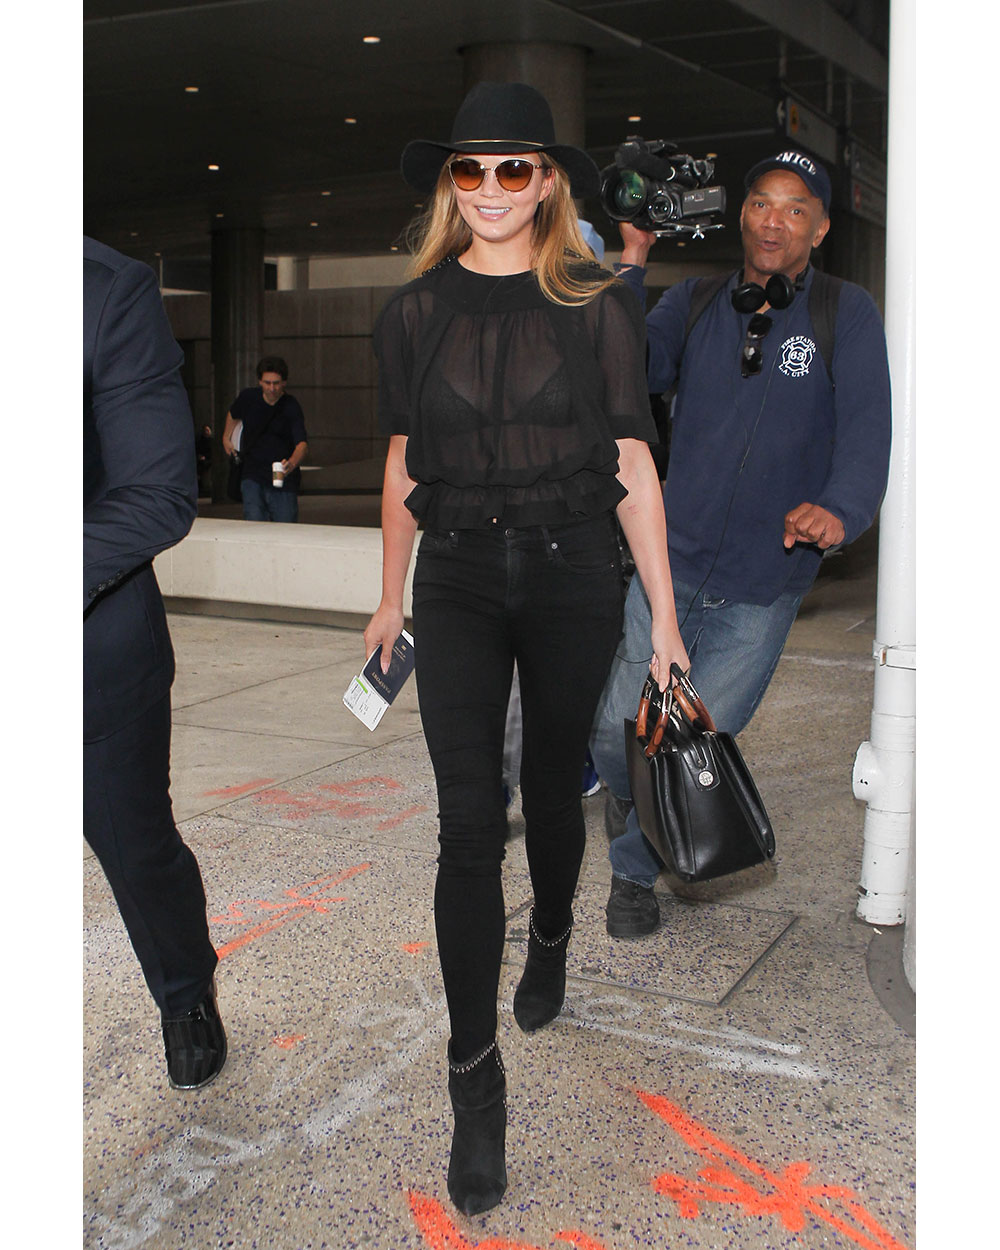 Chrissy Teigen wearing all black at LAX. Photo / Getty Images